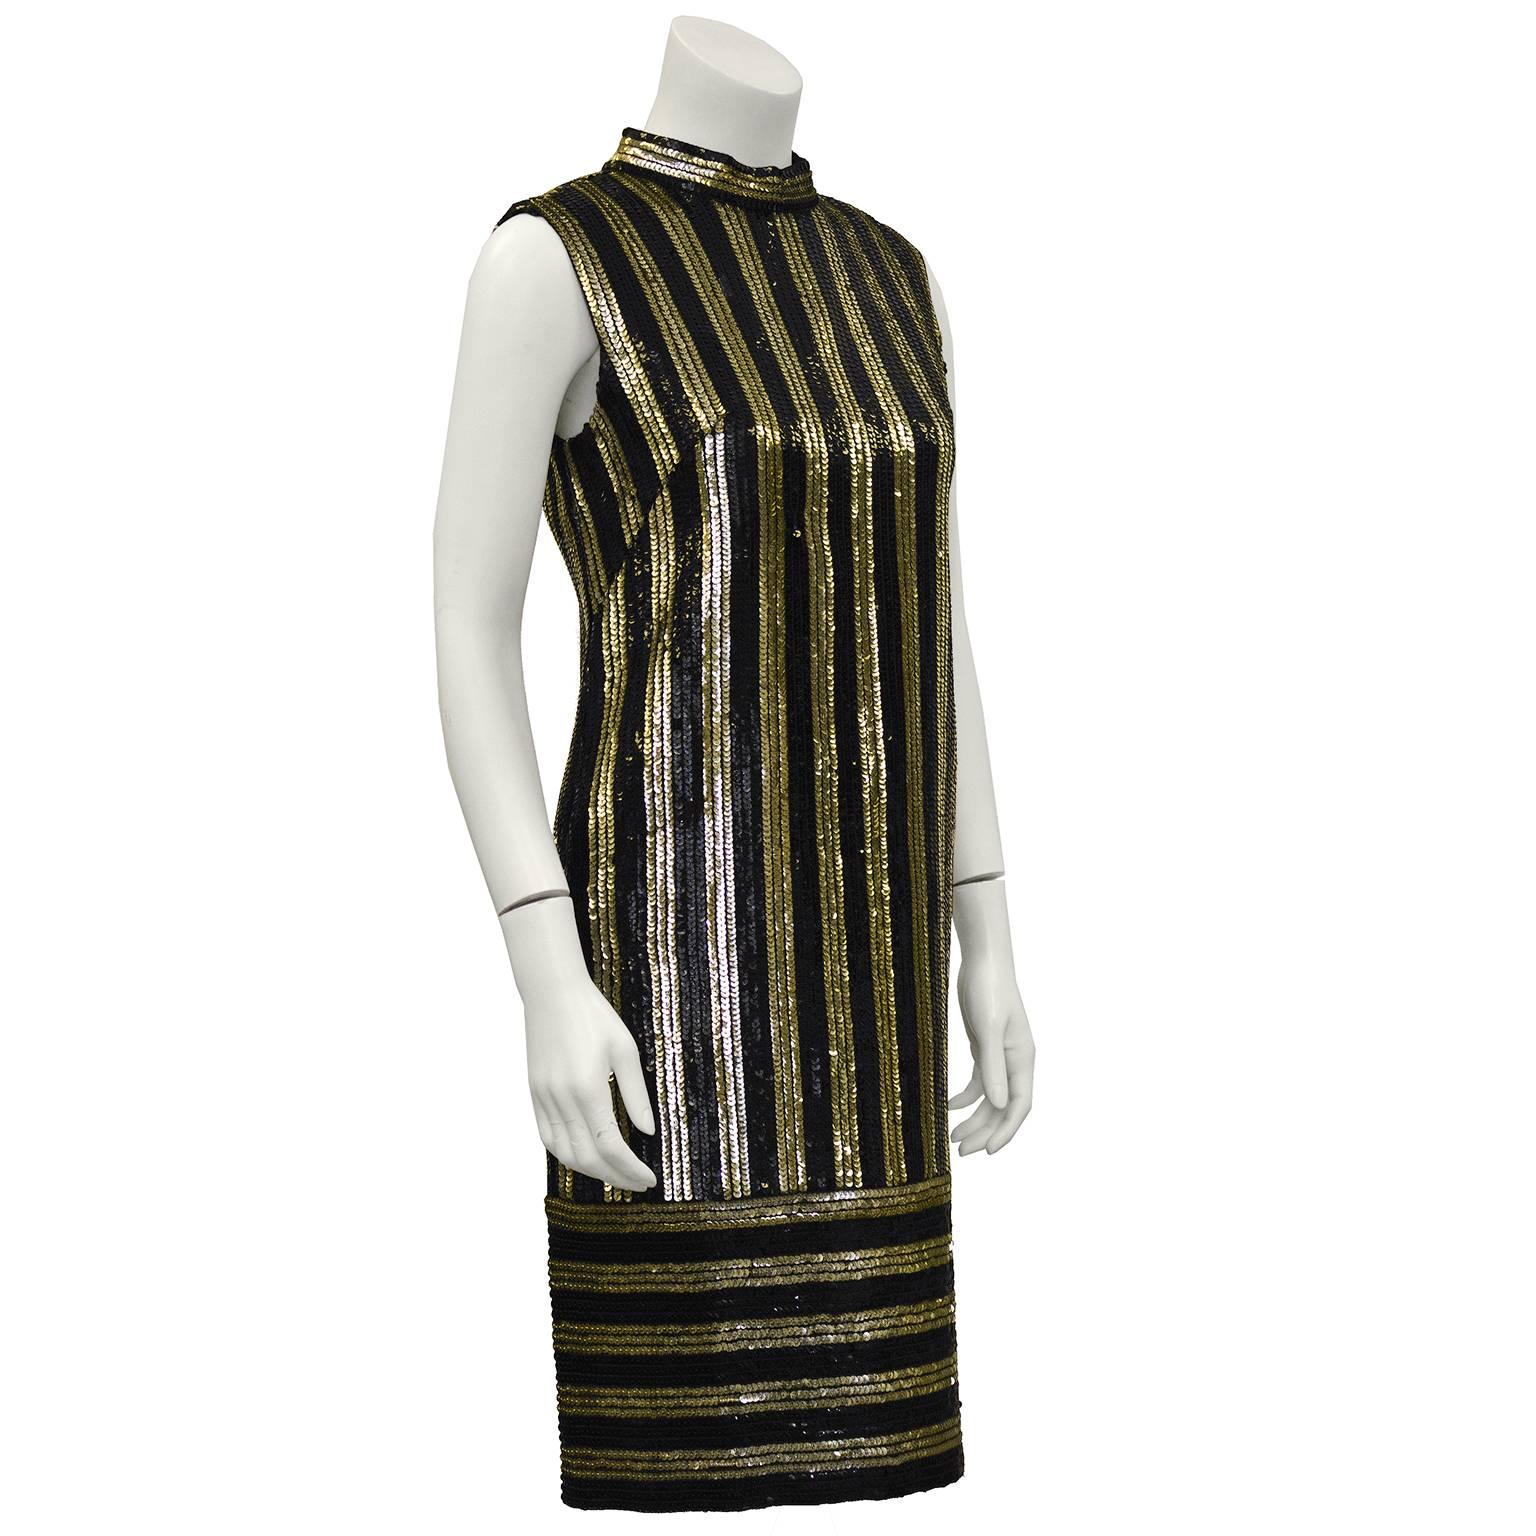 Anonymous gold and black sequin striped evening dress from the 1960's. The dress has a high collar, is sleeveless and has the all over detail of sequin stripes, vertical along the body and horizontal on the drop skirt. In excellent condition, zips